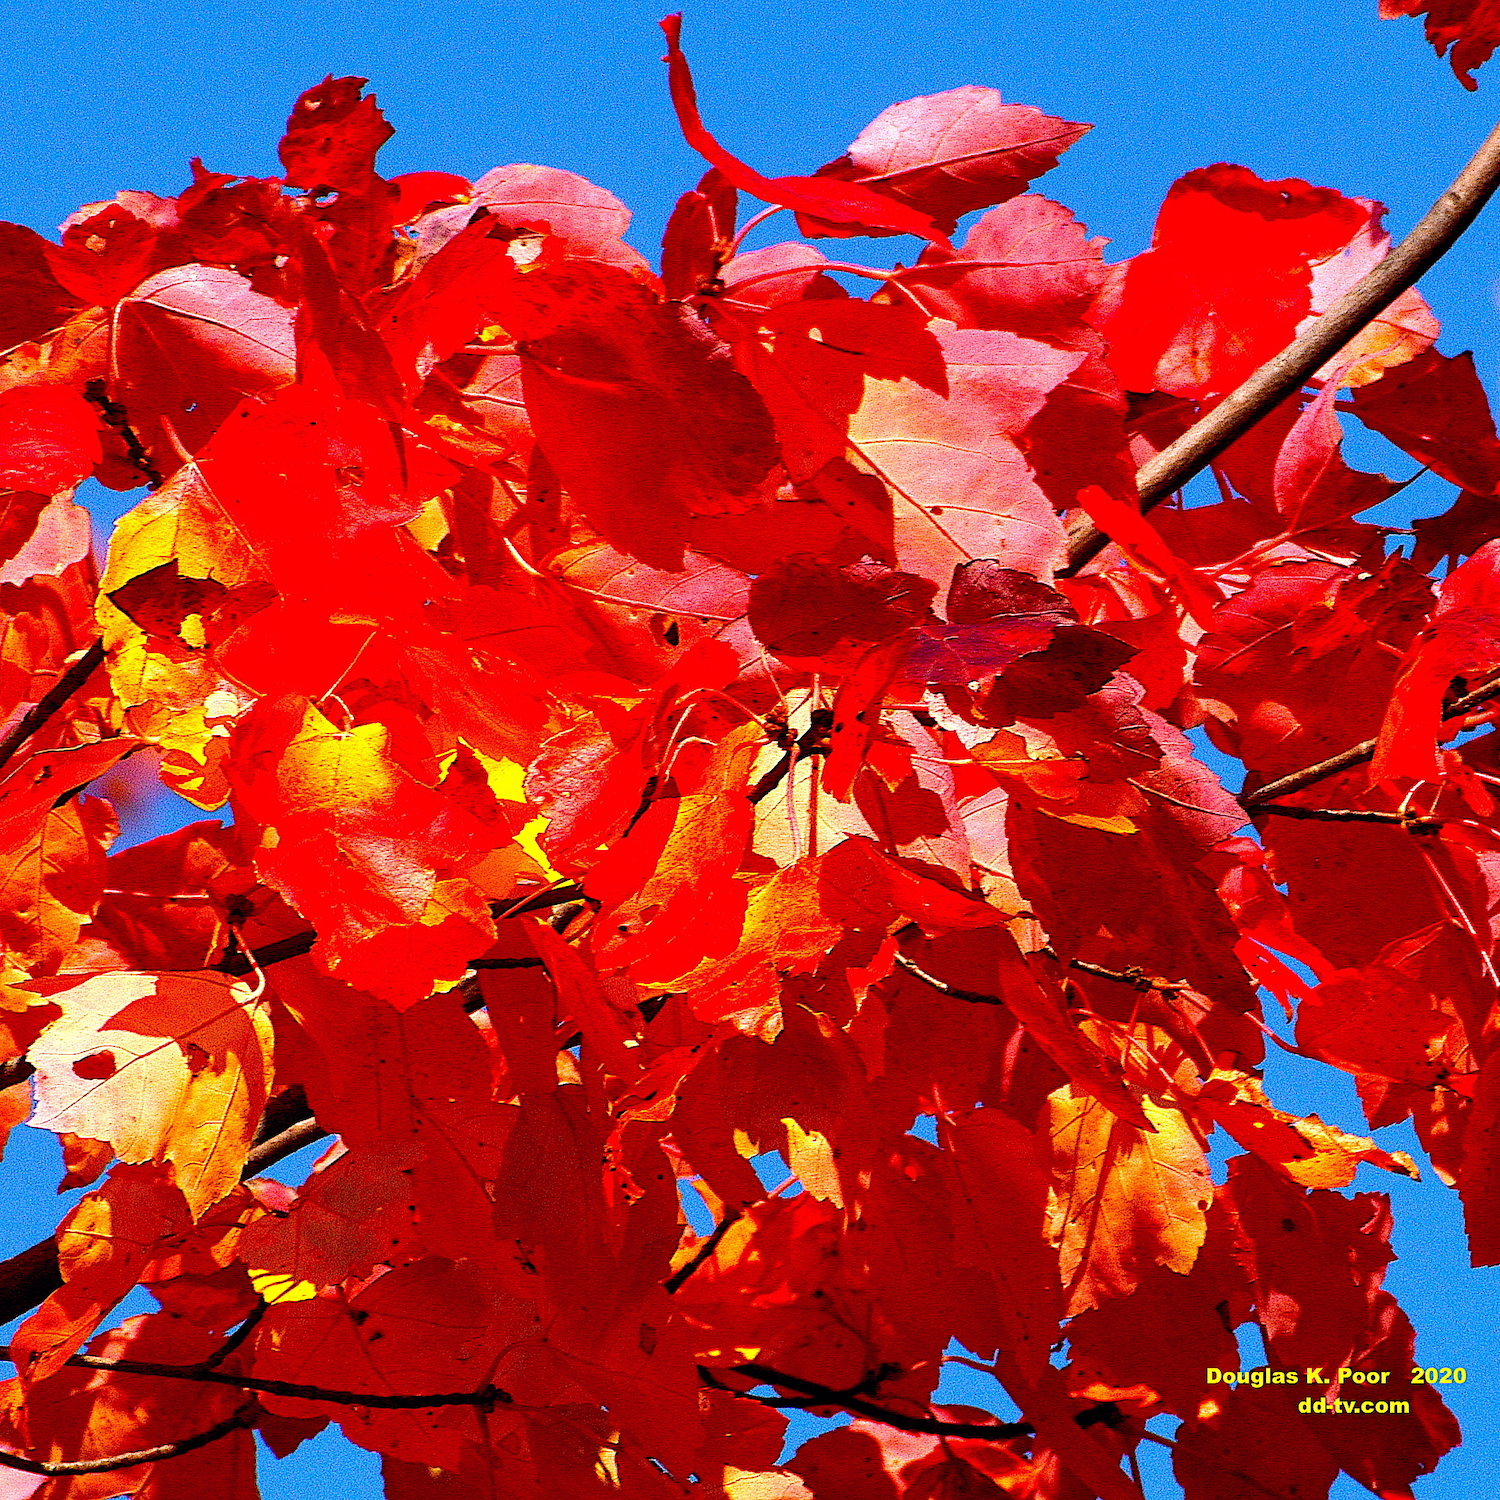 ================-CLUMP-OF-MAPLE-LEAVES-AND-BLUE-SKY-CLOSE-smaller-size=========================================================================================================-CLUMP-OF-MAPLE-LEAVES-AND-BLUE-SKY-CLOSE-smaller-size==========